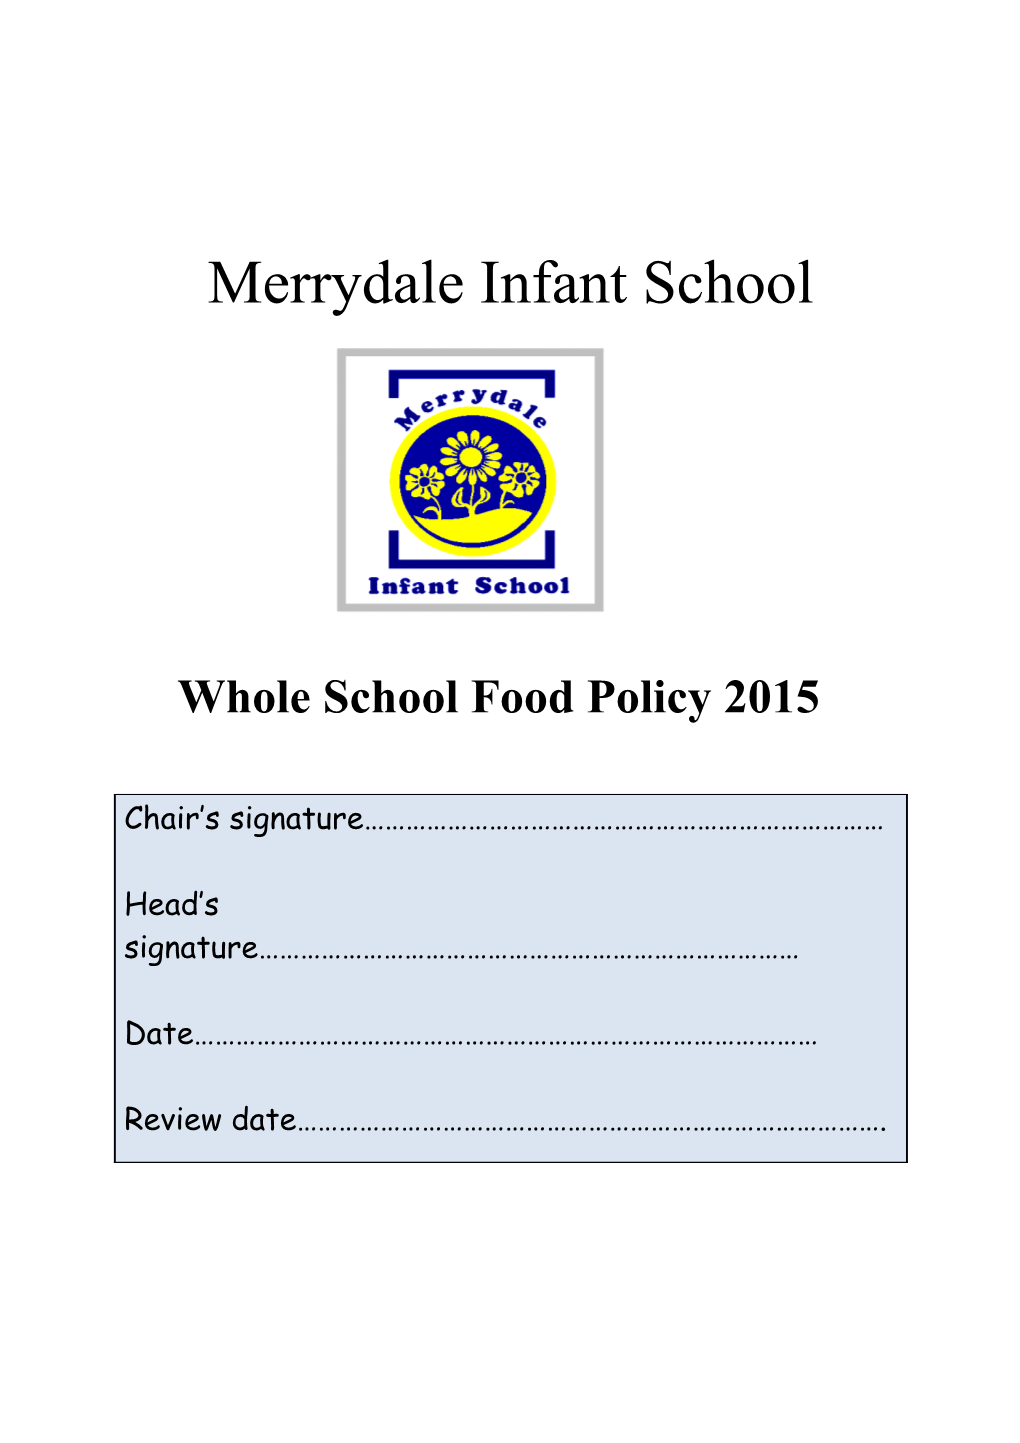 Whole School Food Policy 2015